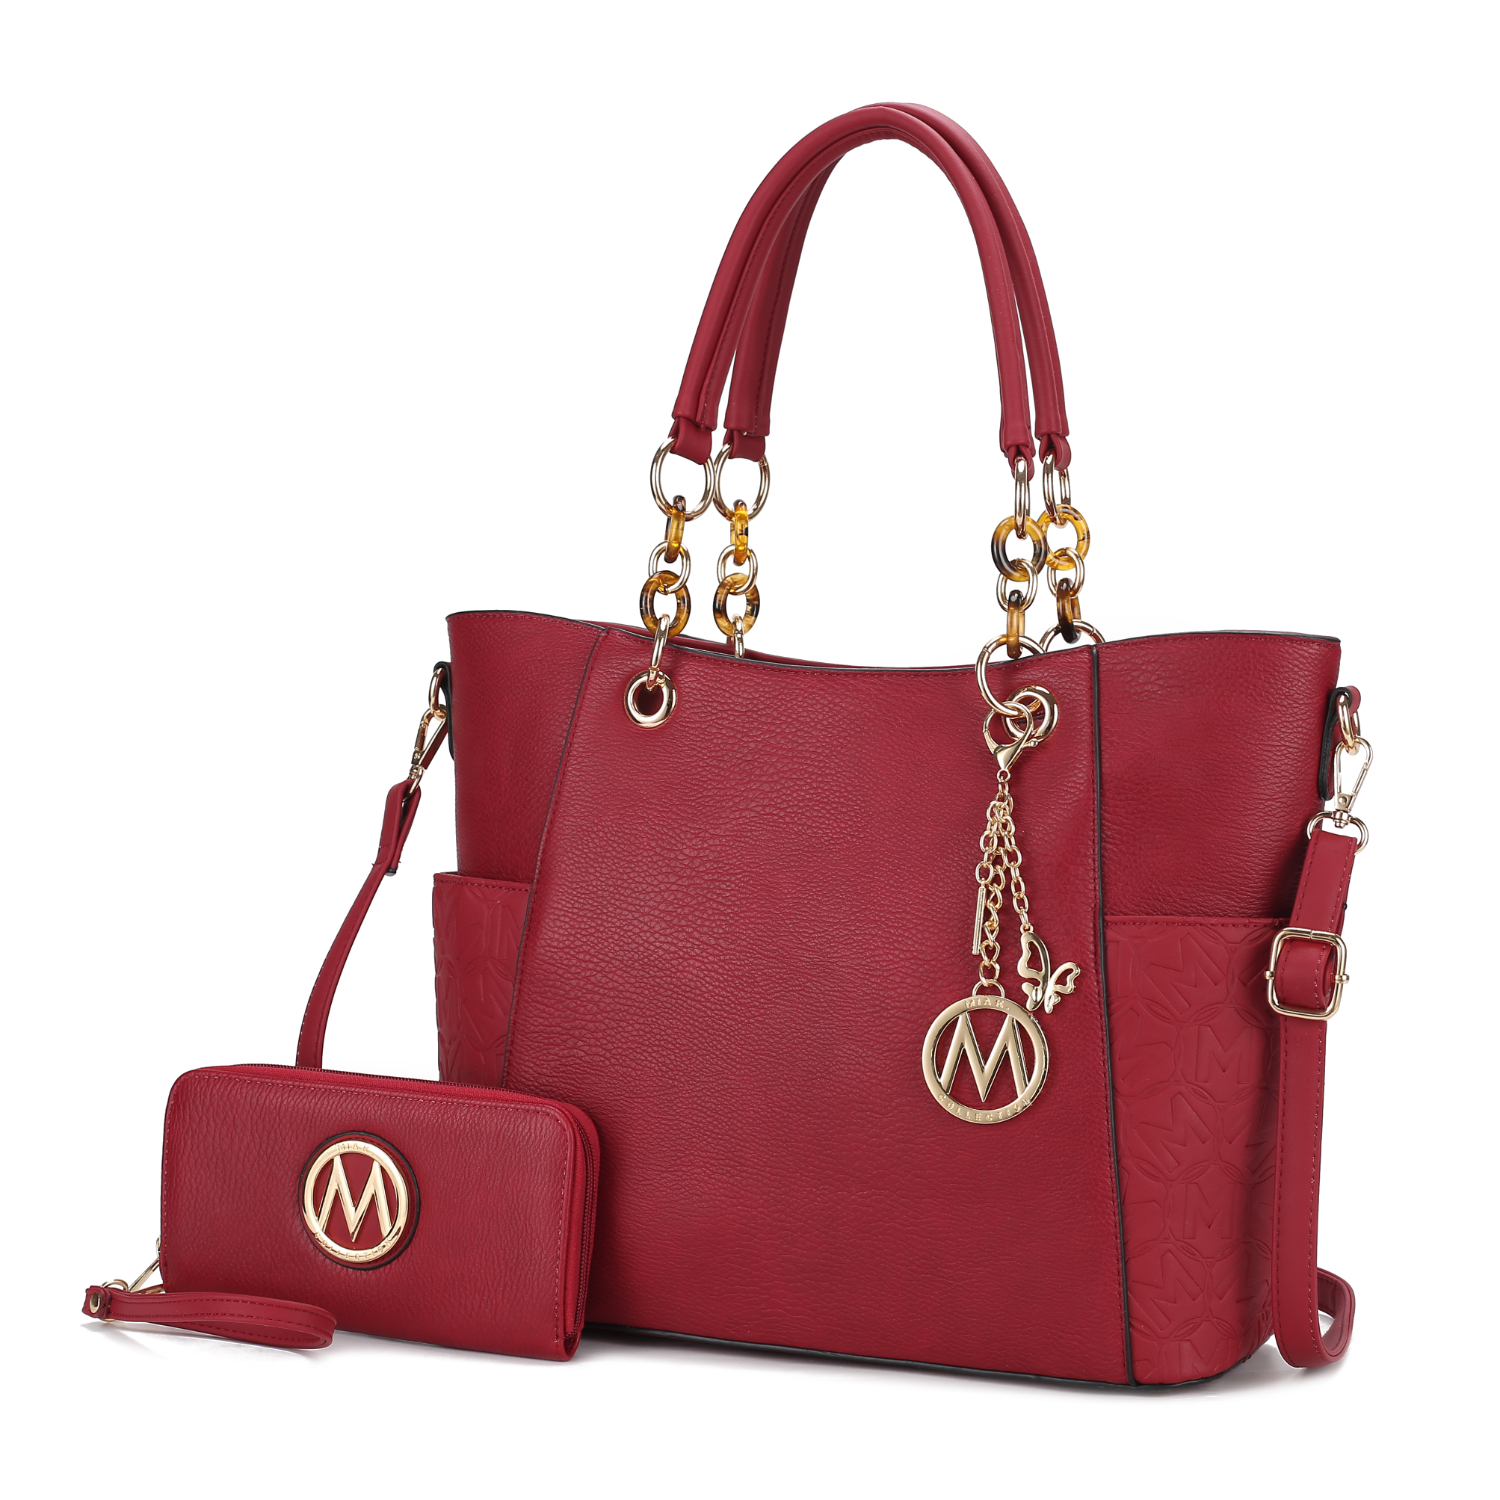 MKF Collection Merlina Embossed Pockets Vegan Leather Women's Tote Bag With Wallet - 2 Pieces By Mia K - Burgundy